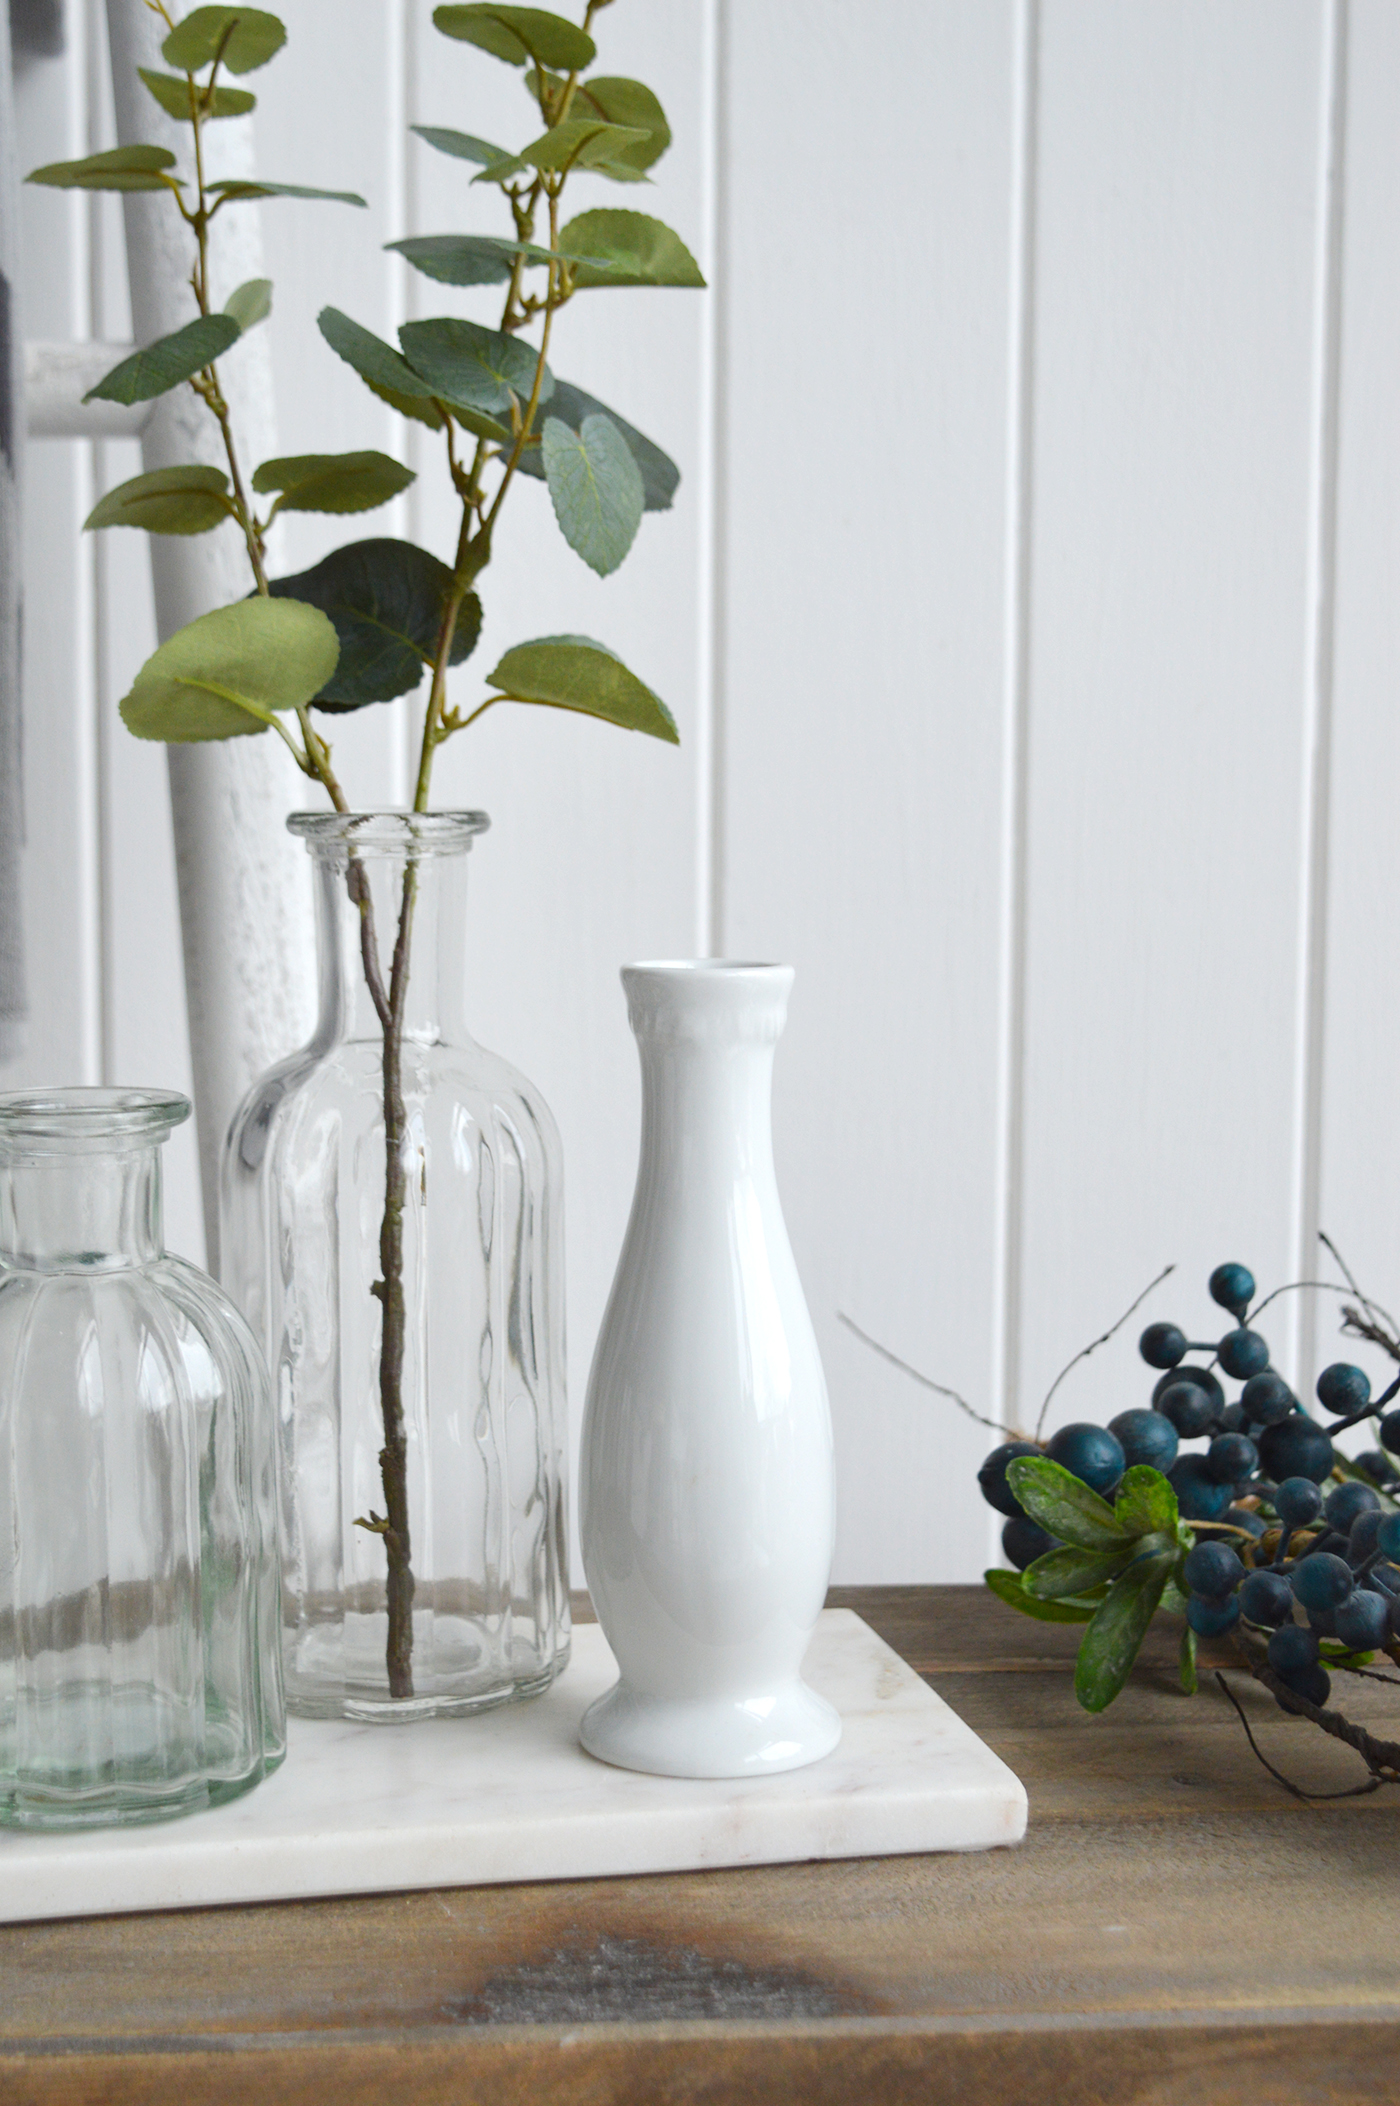 Madison Simple White Ceramic Bud Vase from The White Lighthouse coastal, New England and country furniture and home decor accessories UK